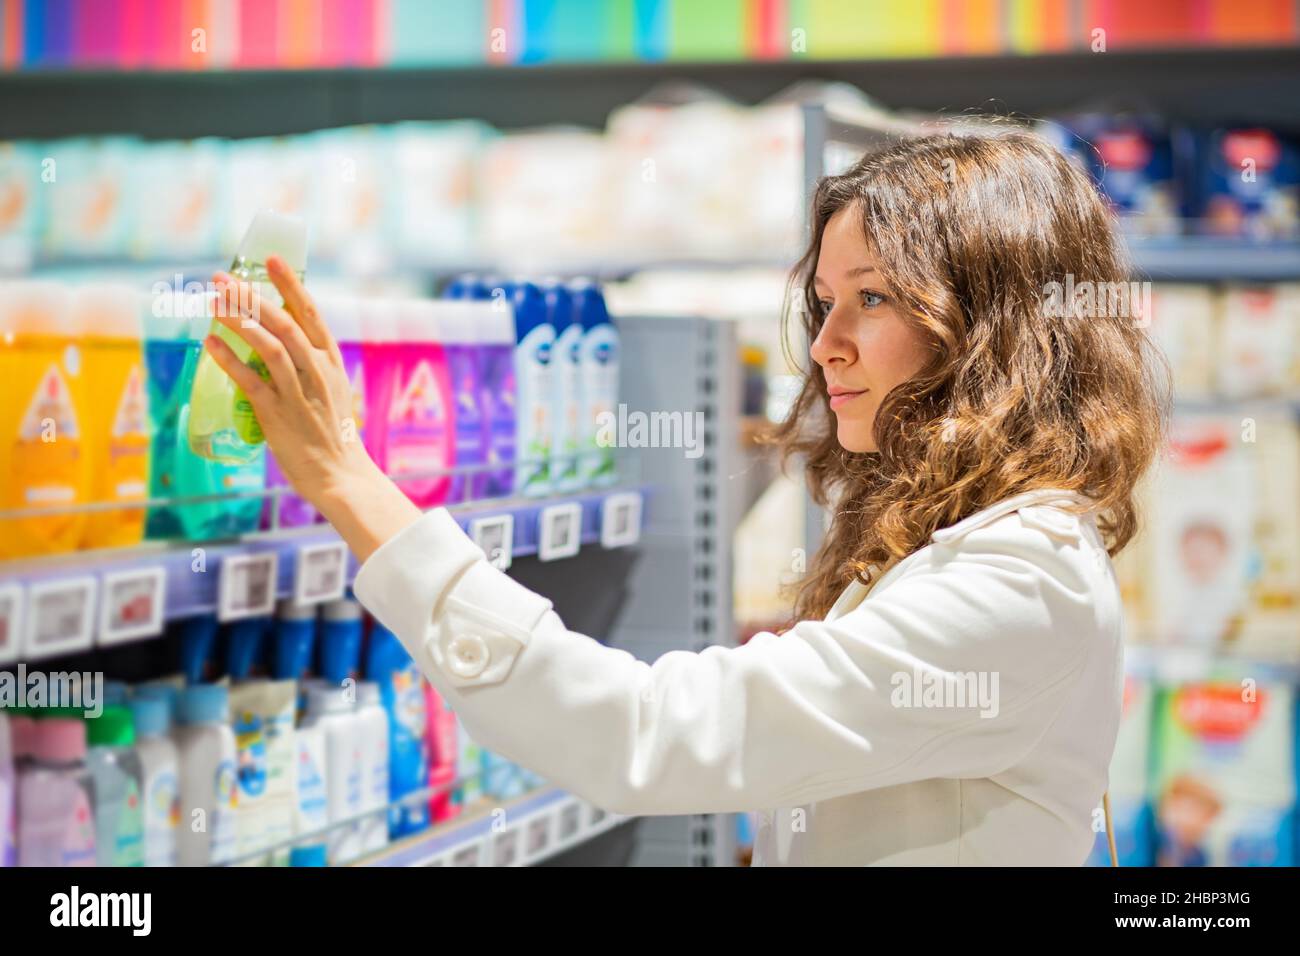 beautiful young woman in a white coat takes shampoo from the shelf in the supermarket Stock Photo